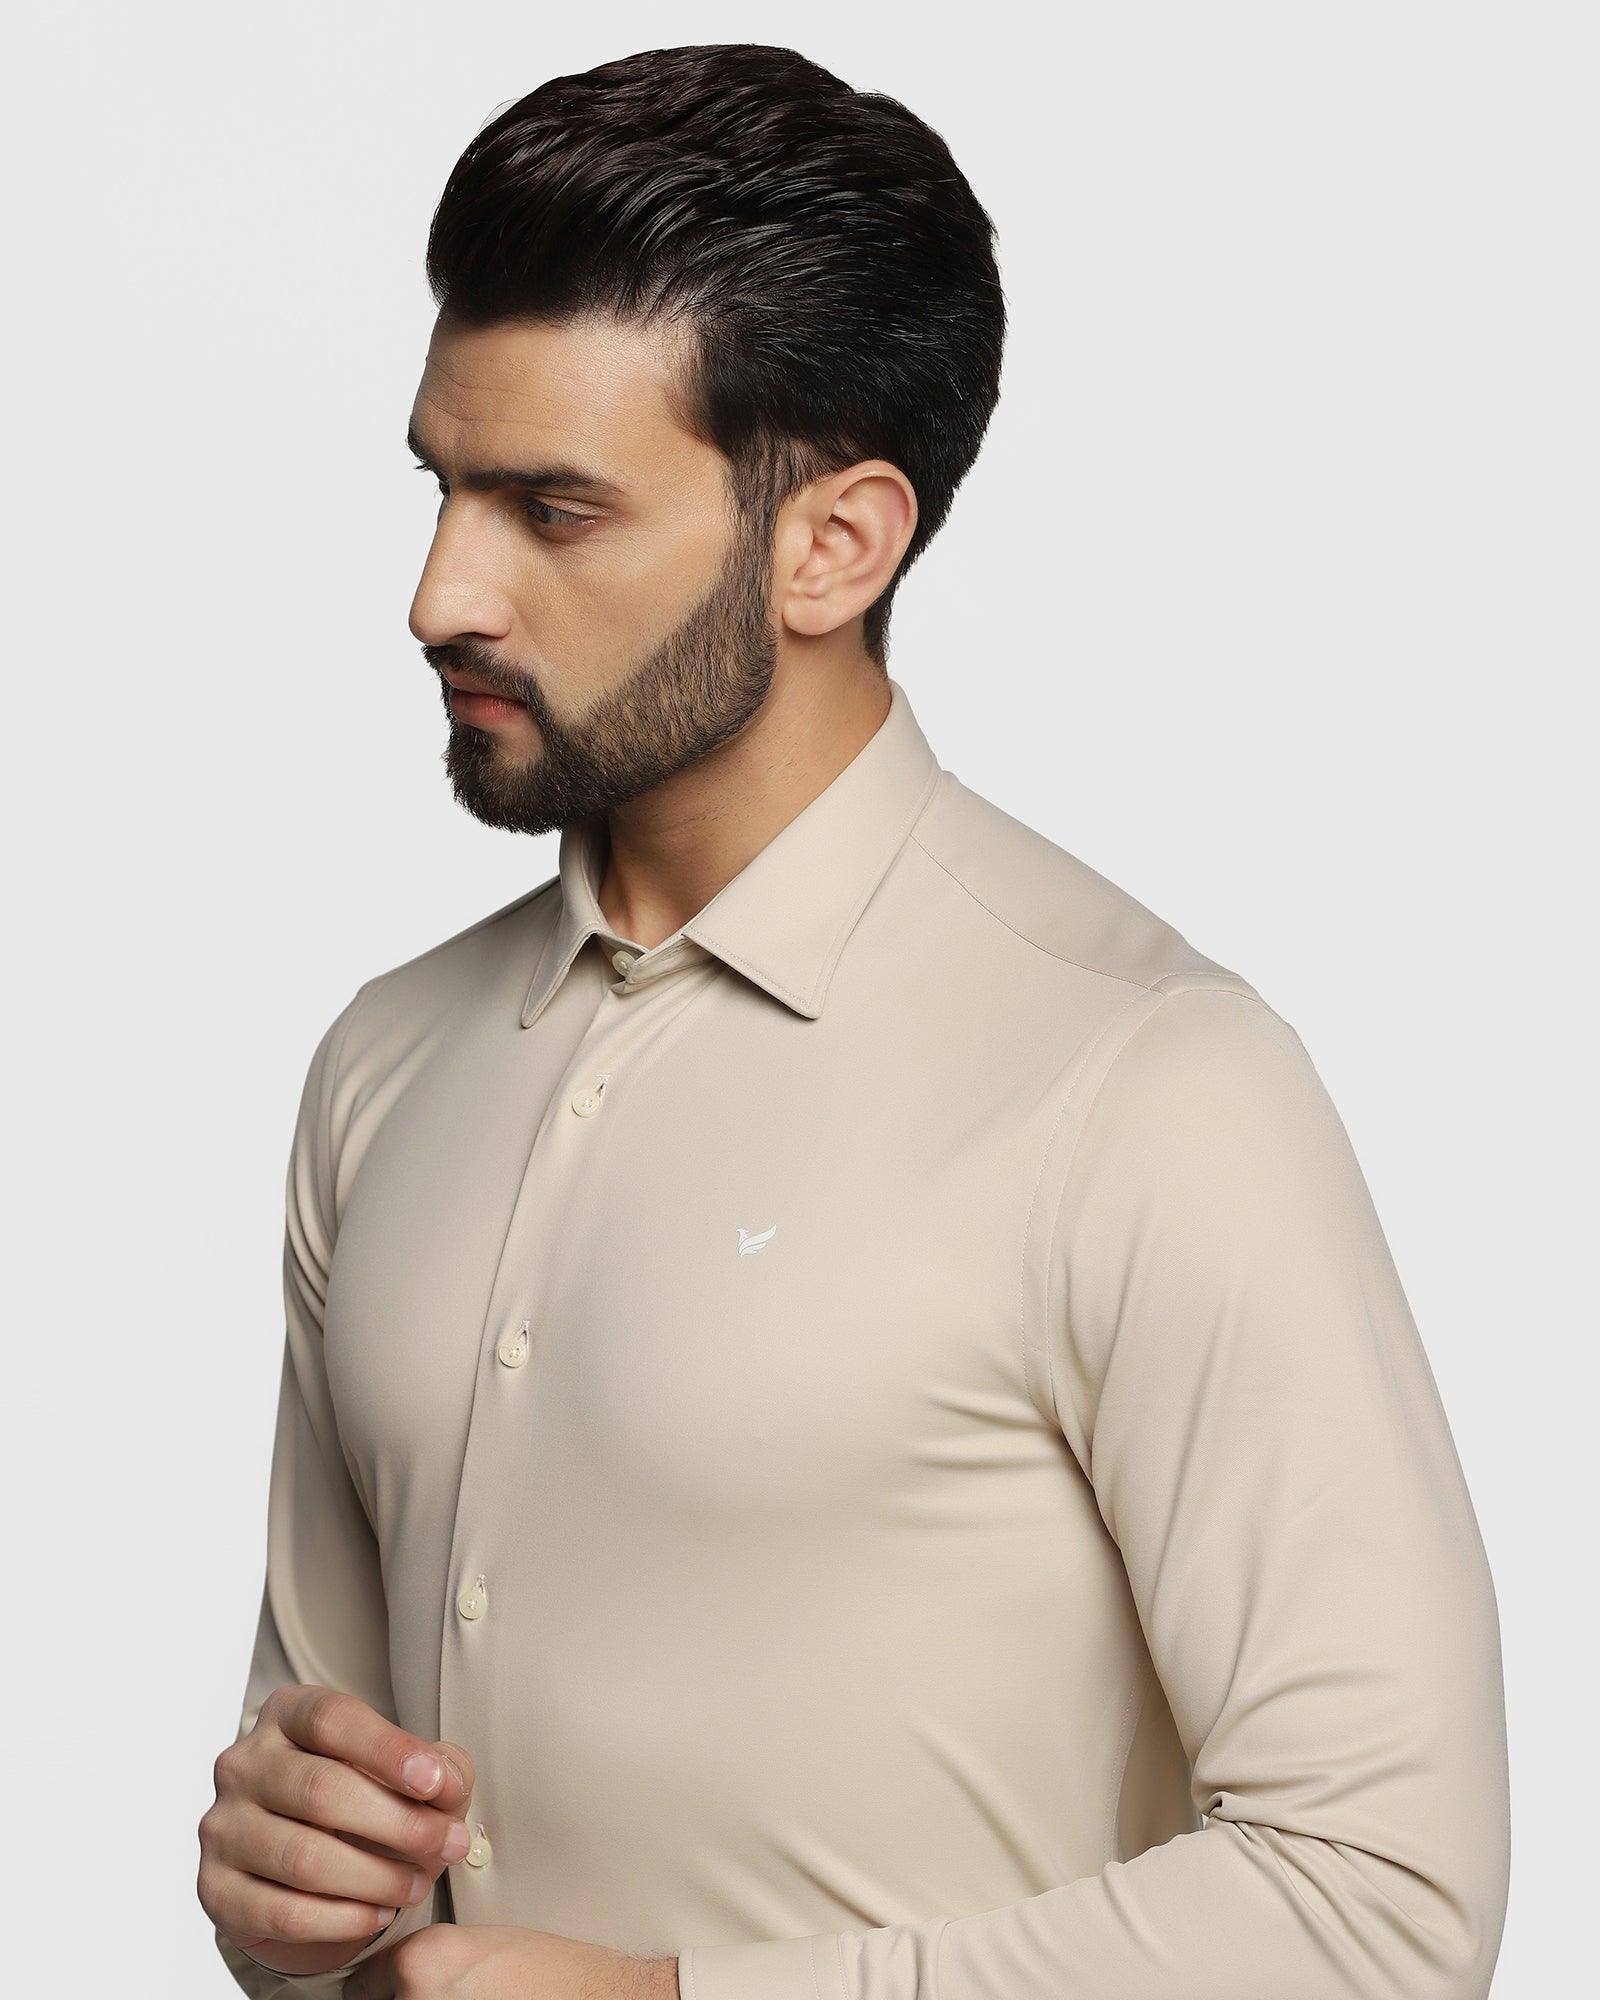 TechPro Formal Beige Solid Shirt - Payback